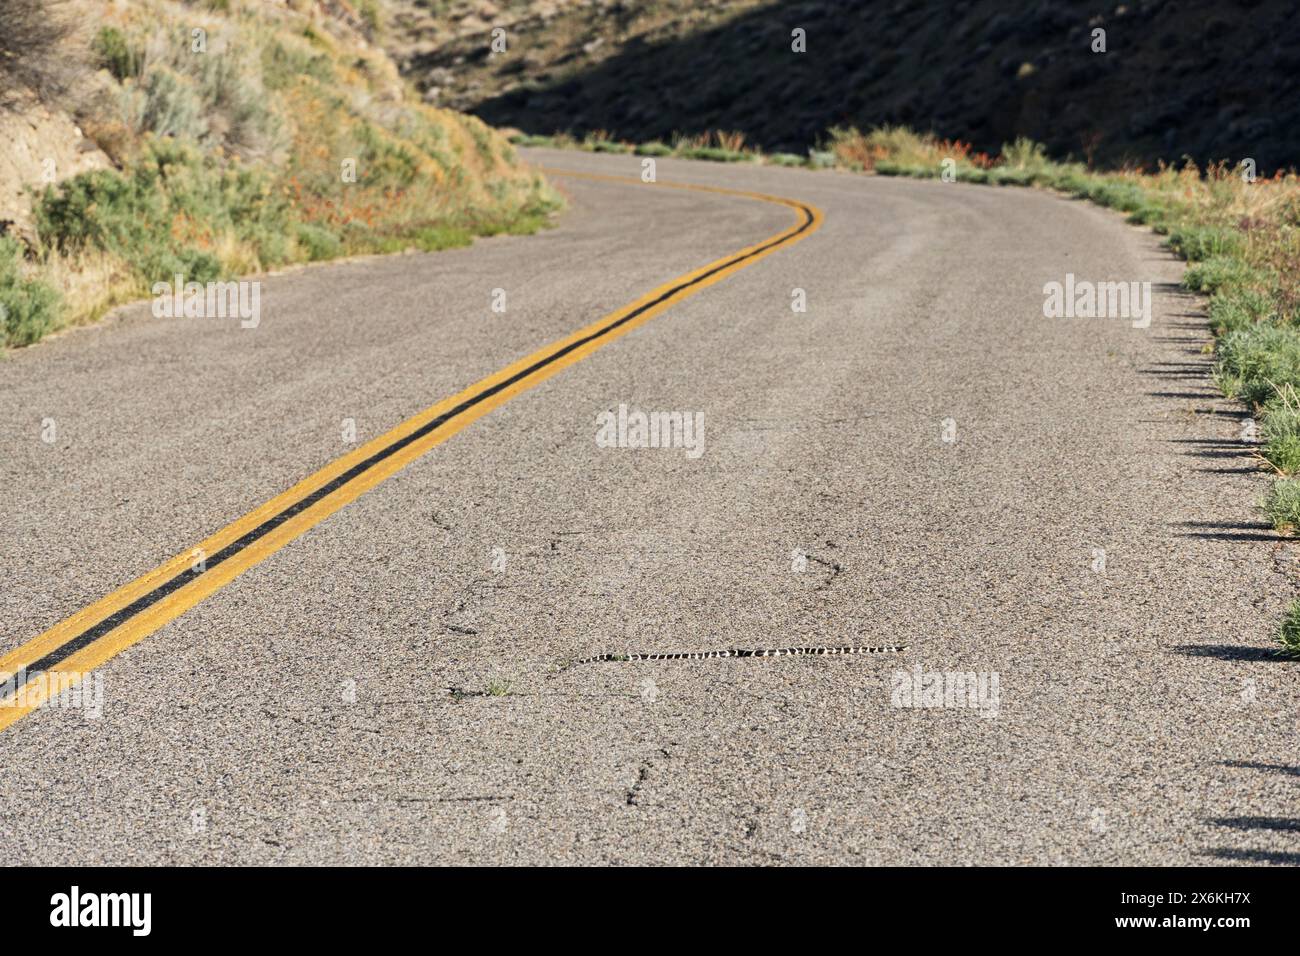 California kingsnake or Lampropeltis californiae sunning itself on a rural road in the Inyo Mountains Stock Photo